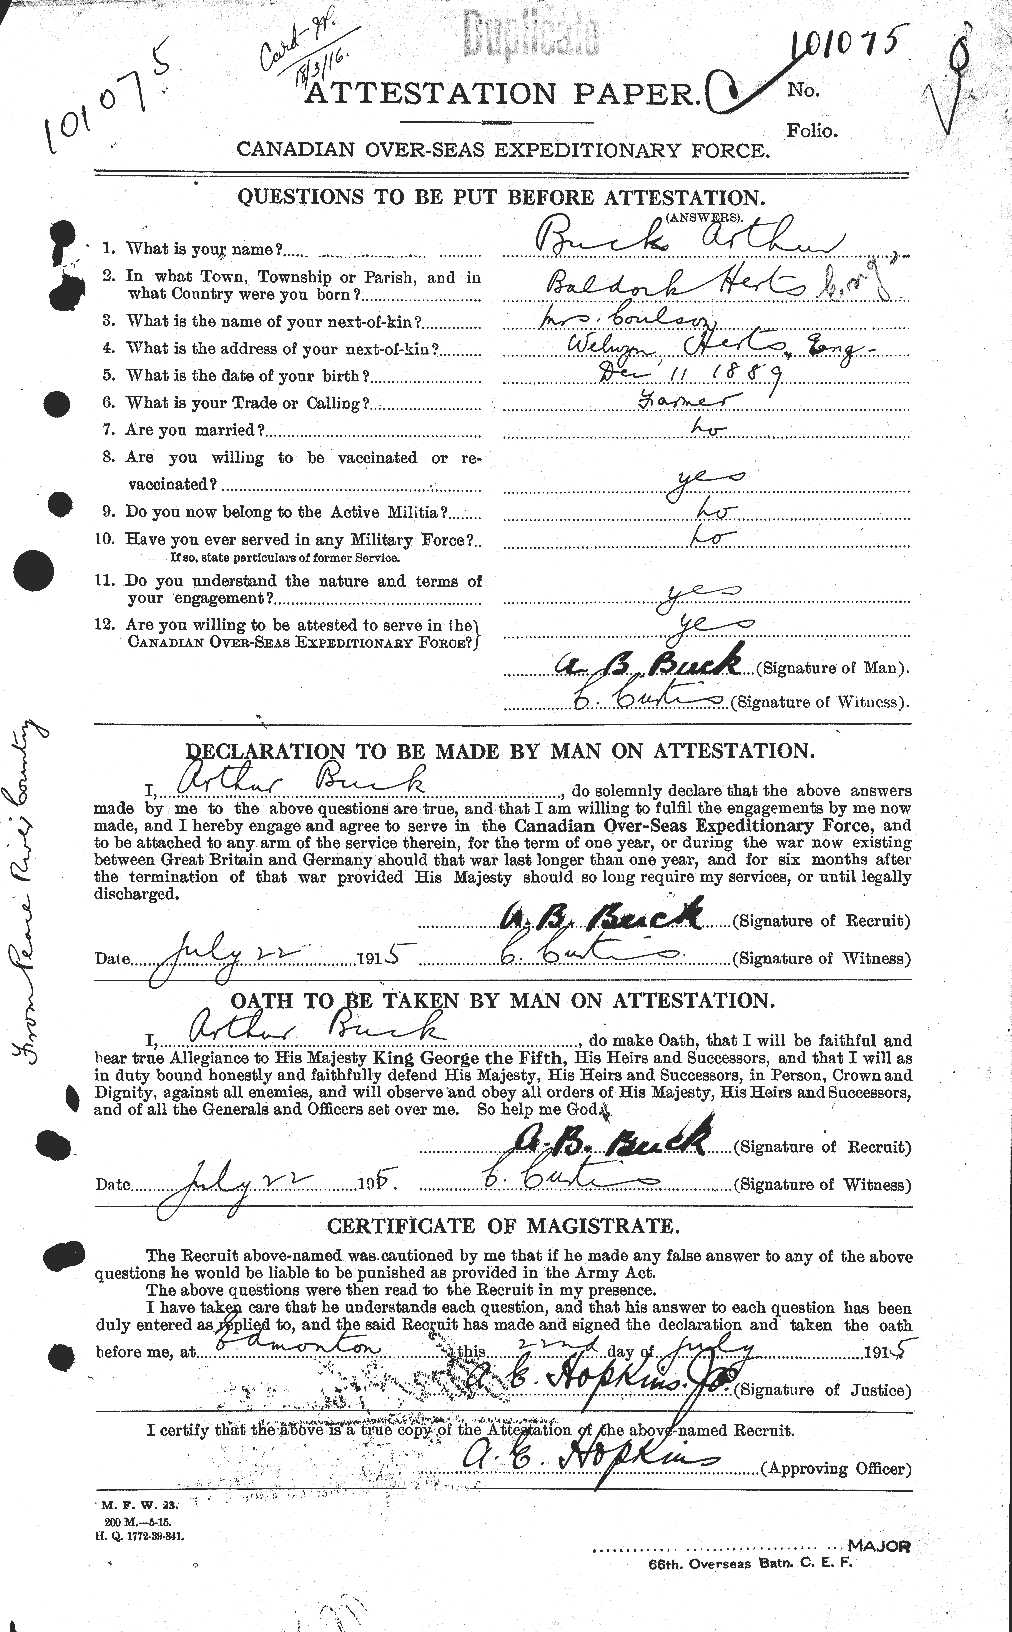 Personnel Records of the First World War - CEF 269250a